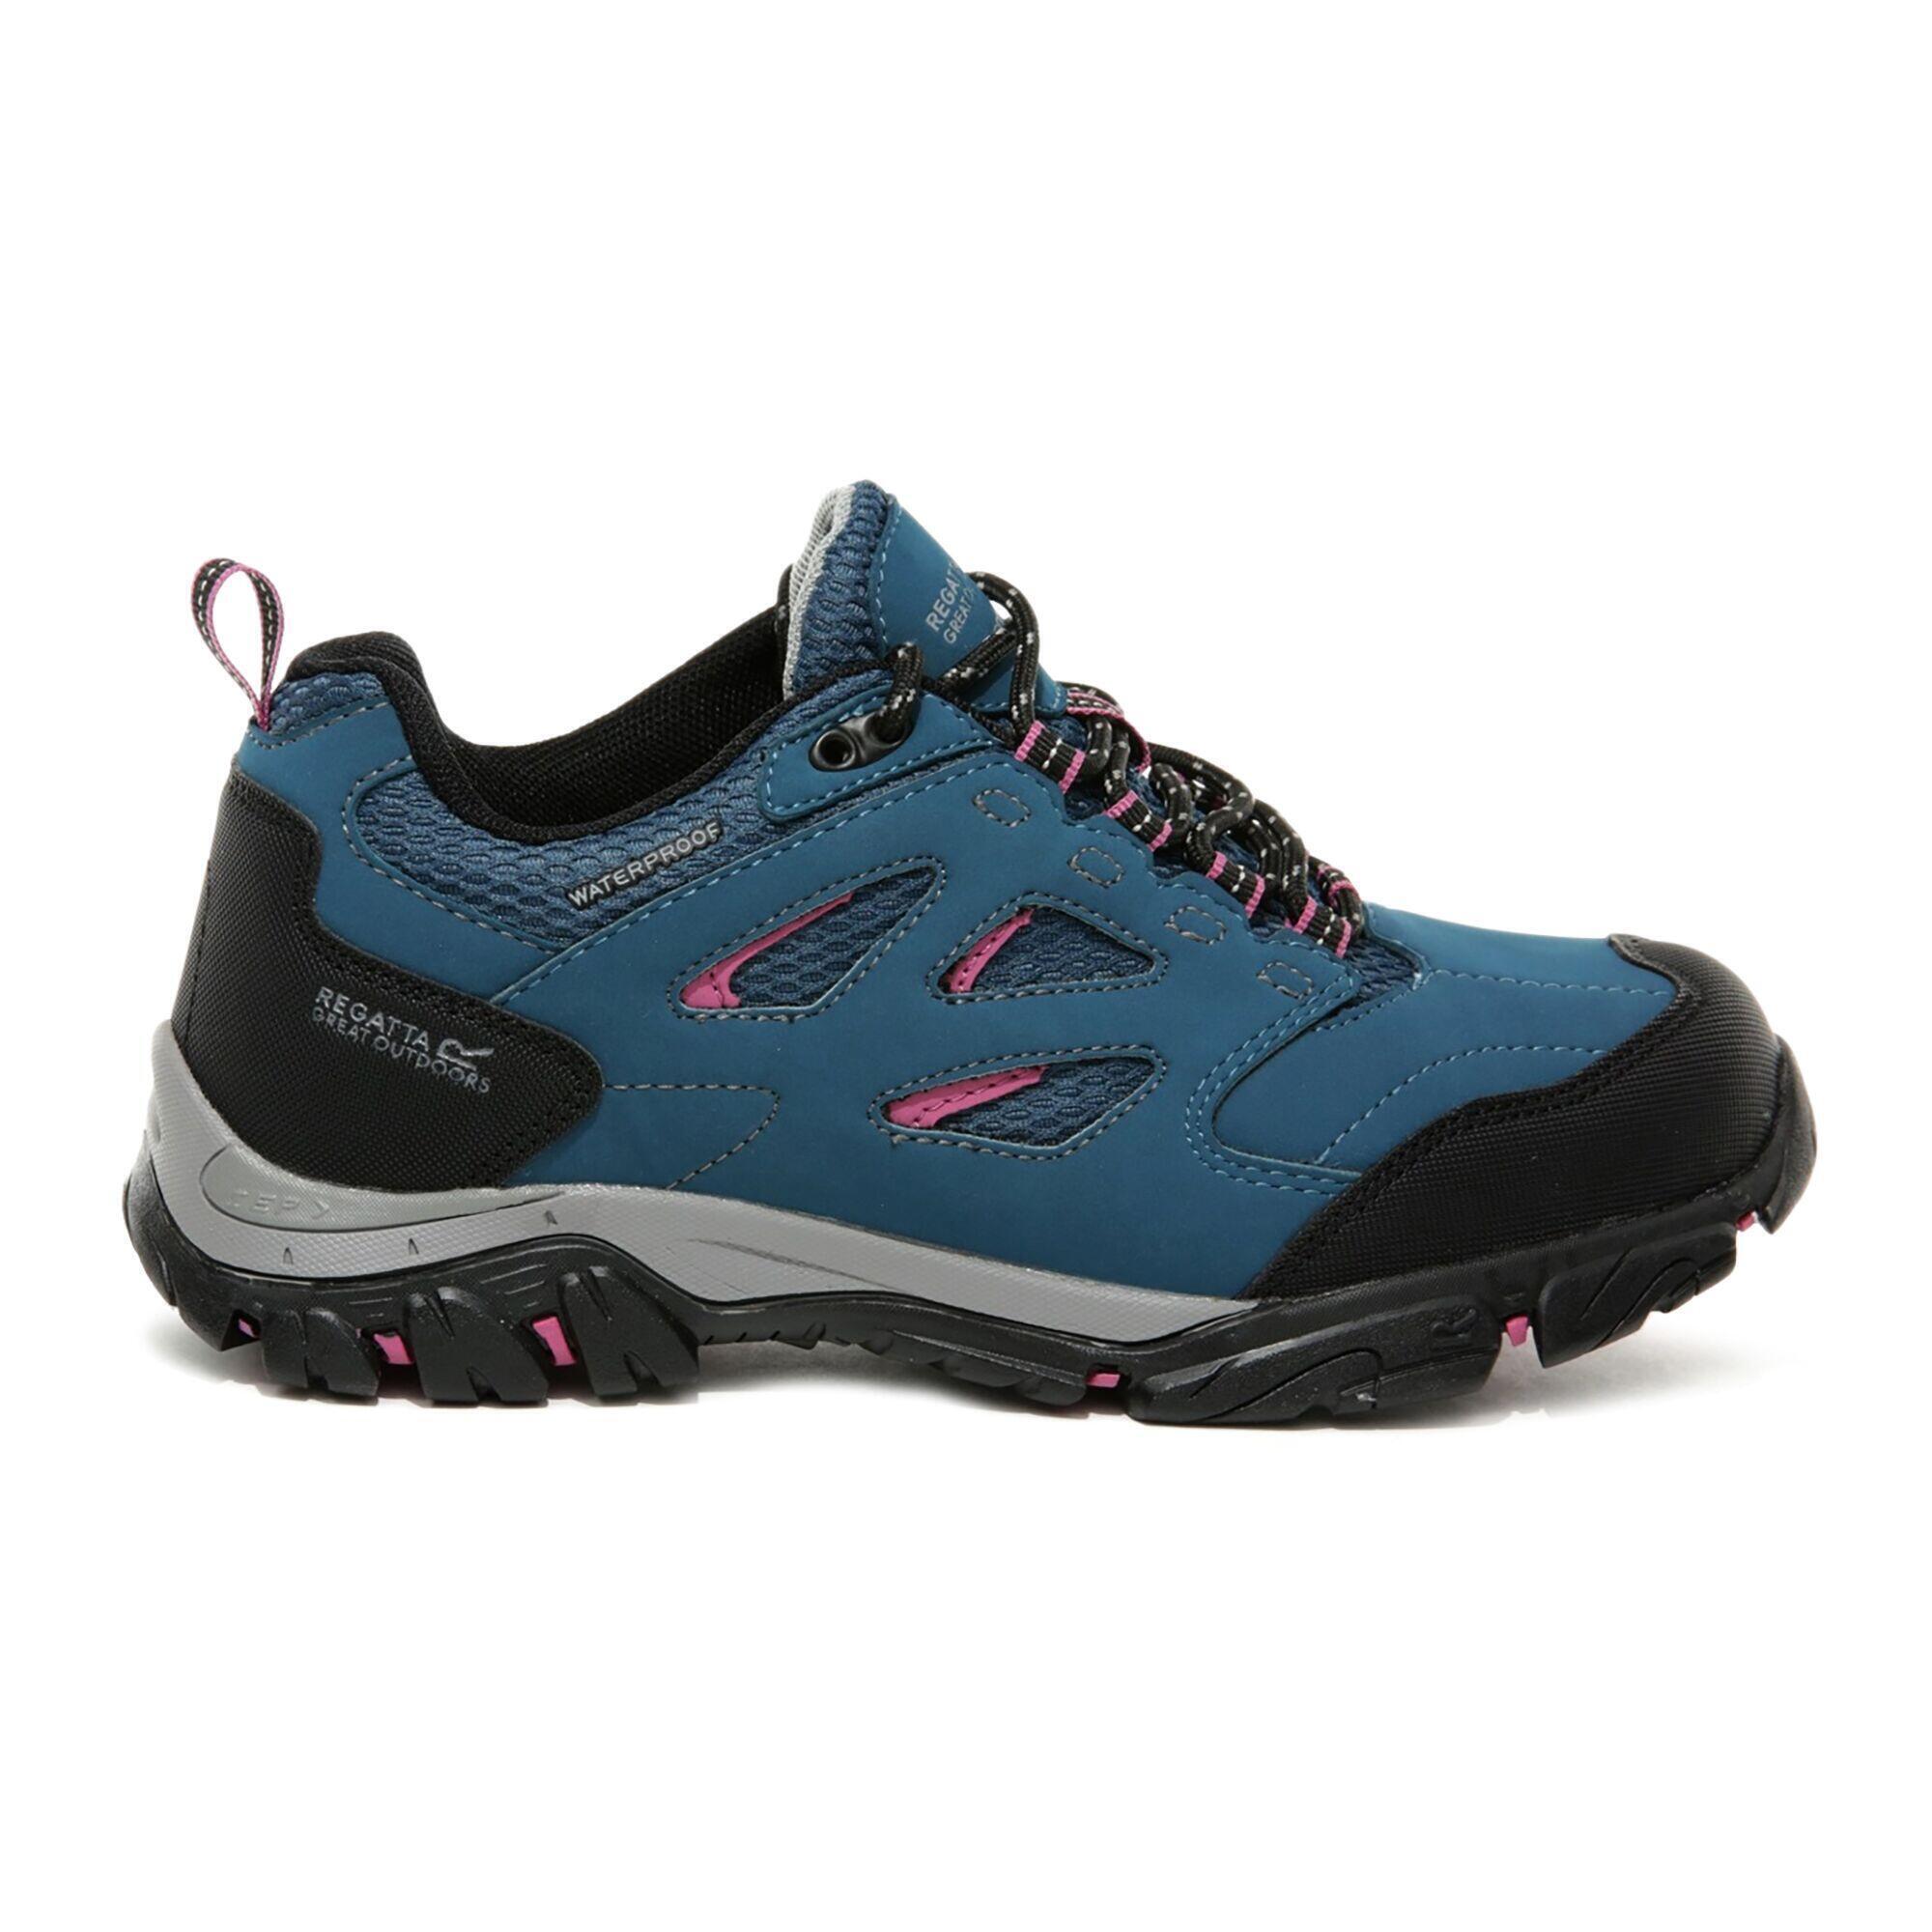 REGATTA Lady Holcombe IEP Low Women's Hiking Boots - Moroccan Blue / Red